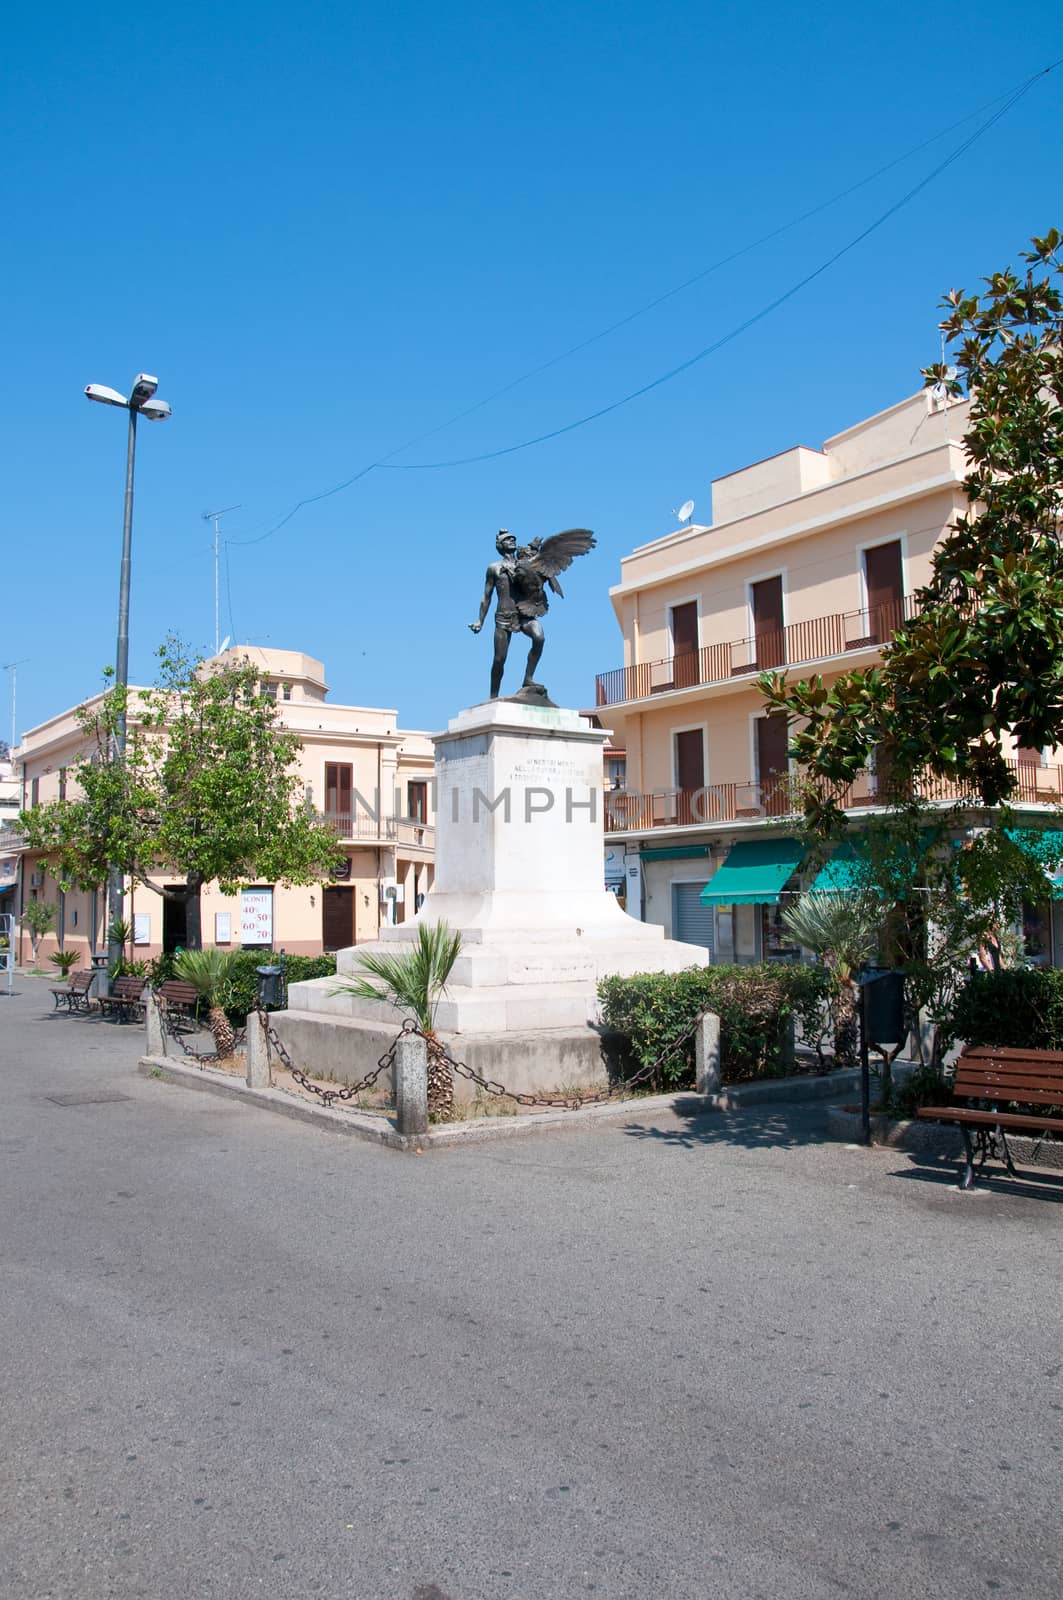 square called "unification of Italy" in Tropea, Calabria, italy